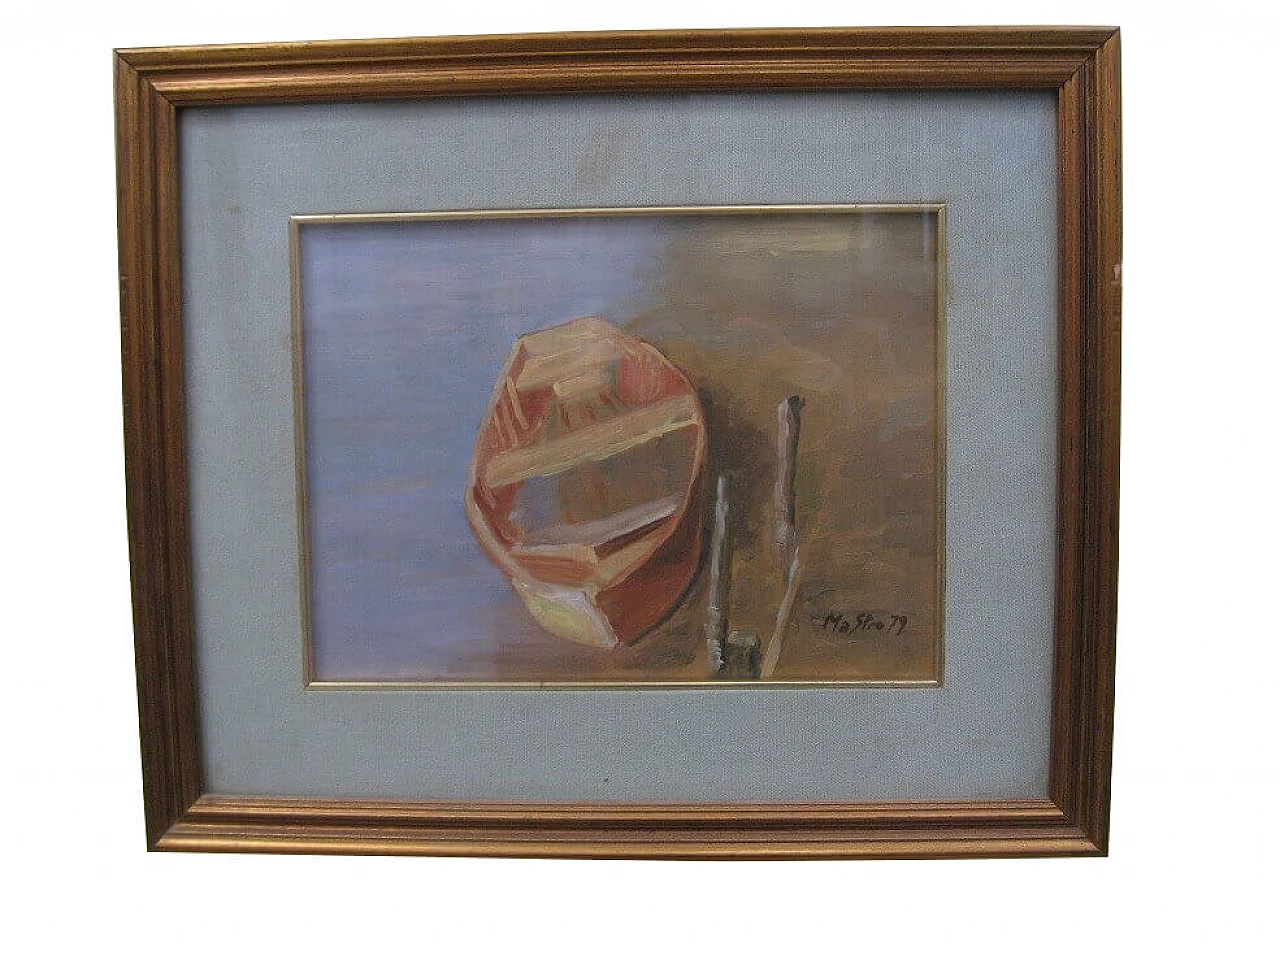 Mario Strocchi, Boat on the Rhine, oil painting on plywood, 1979 9